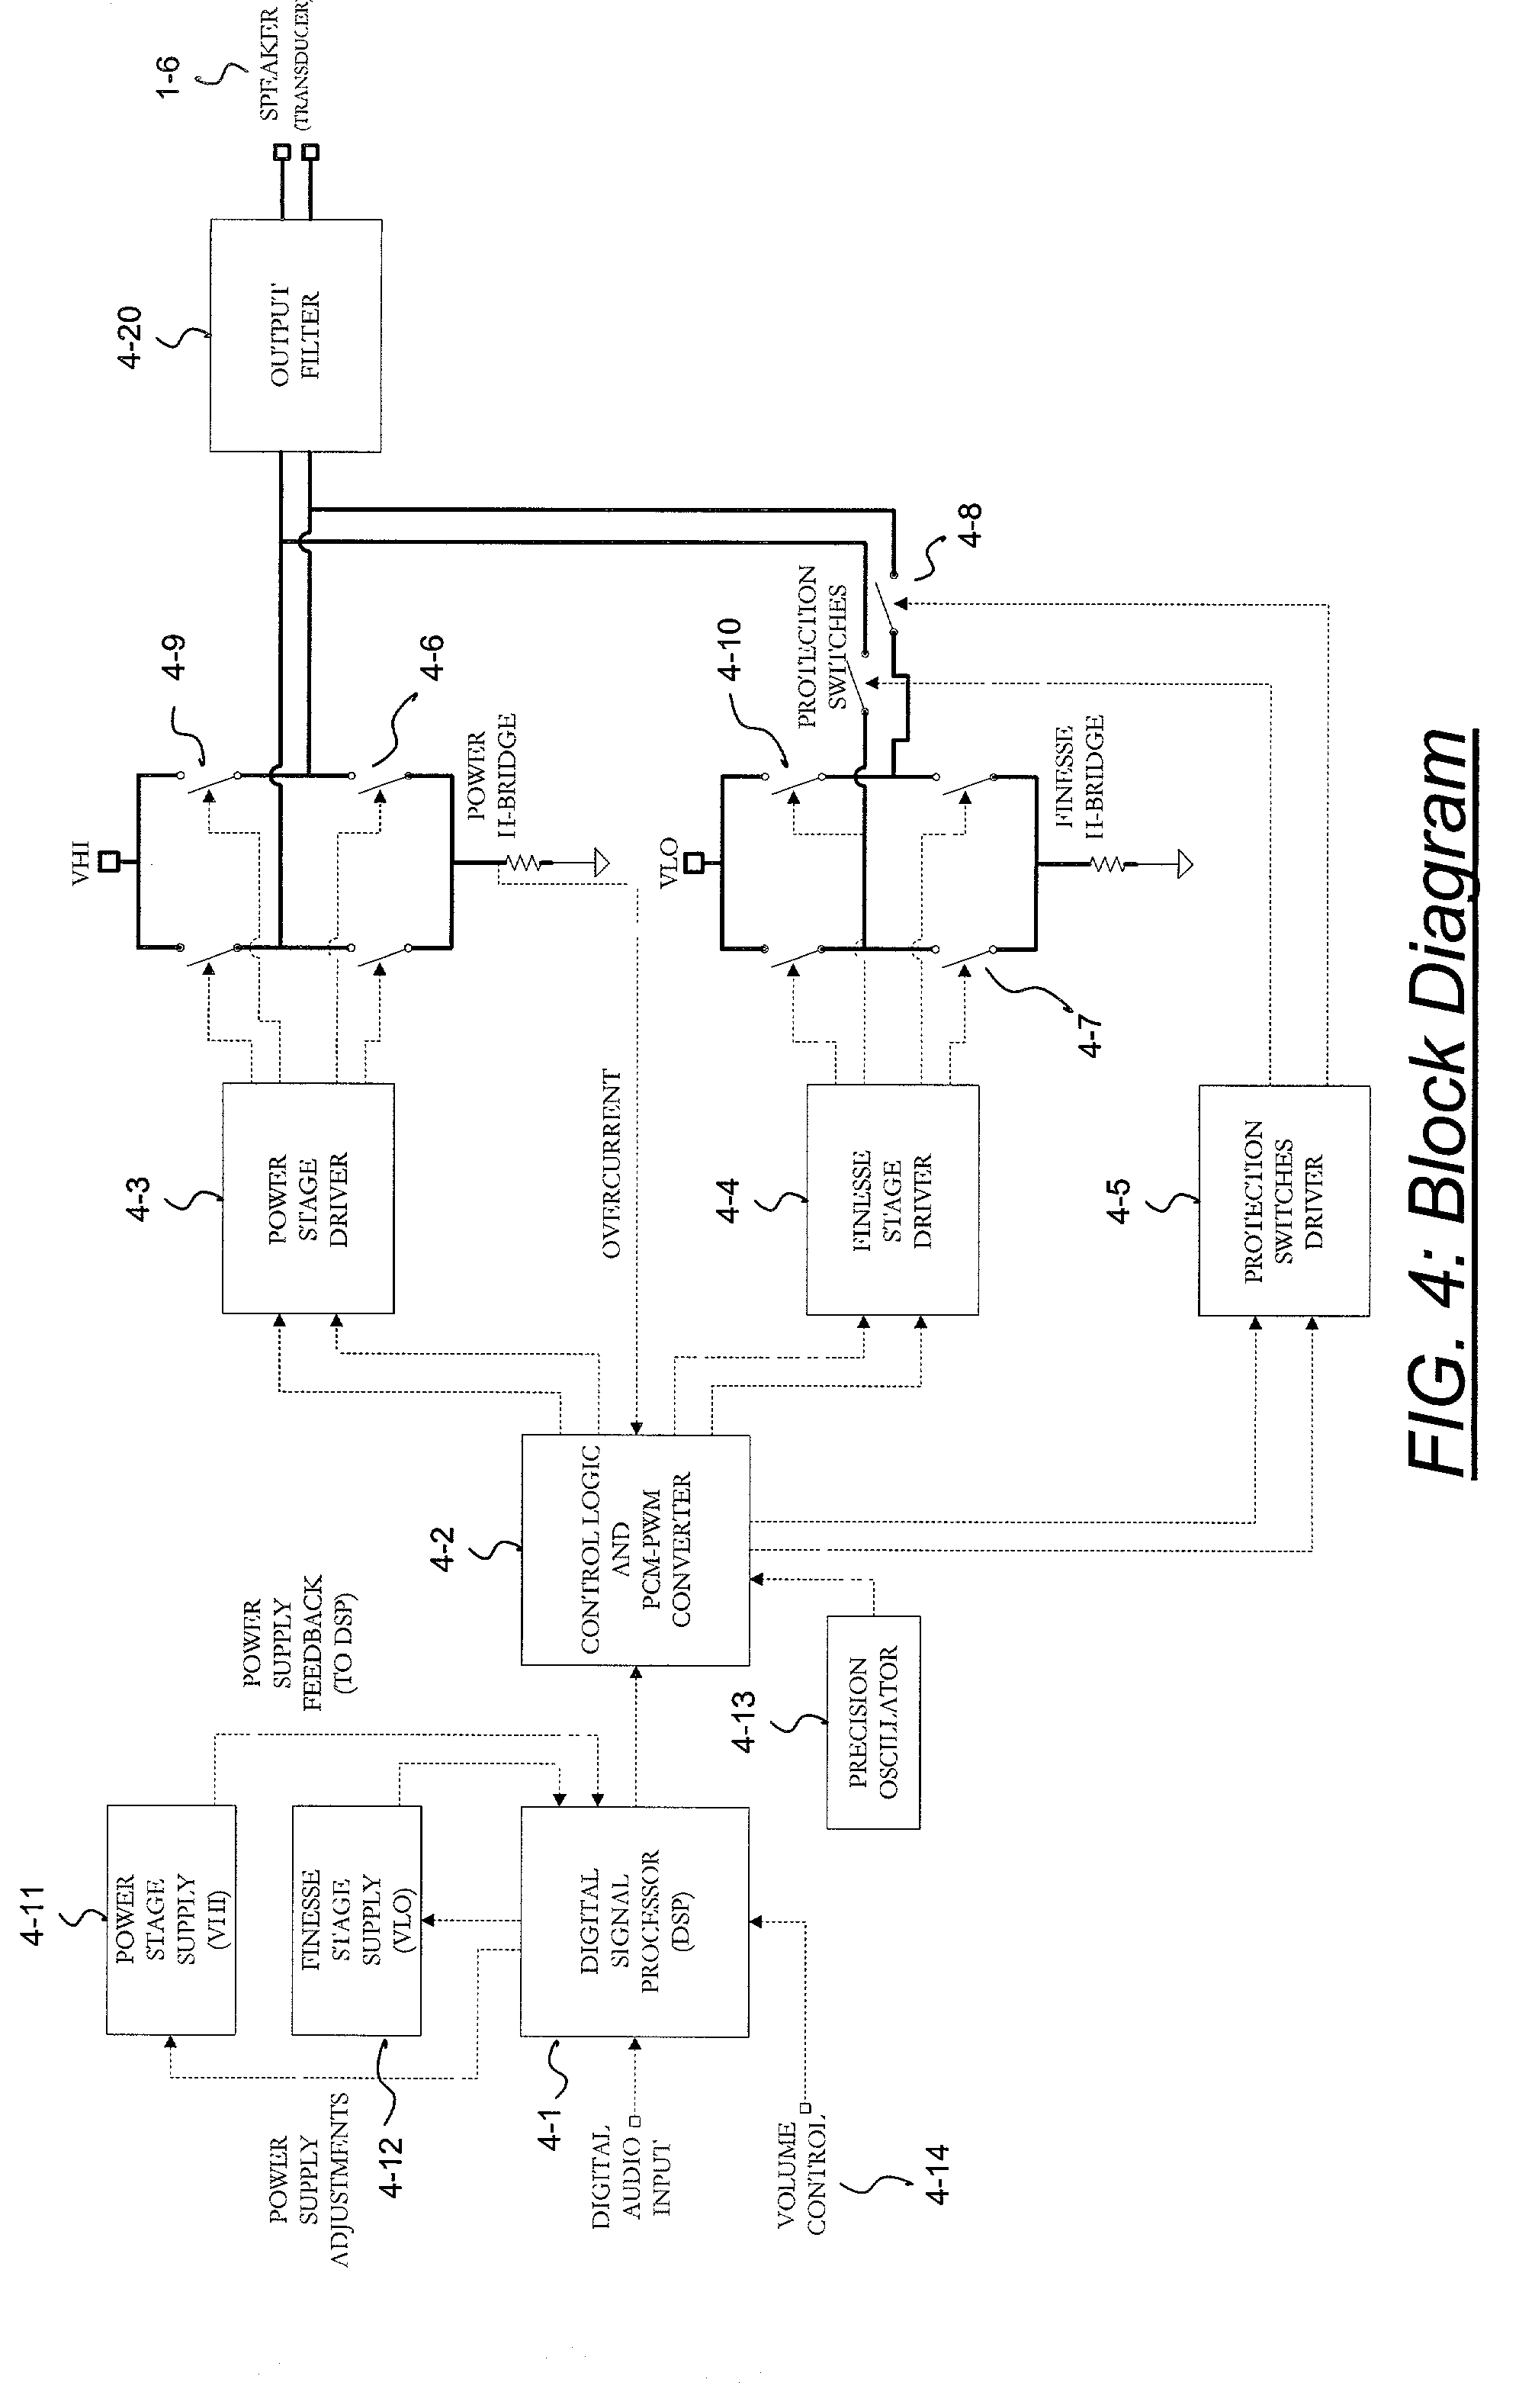 Digital amplifier with improved performance